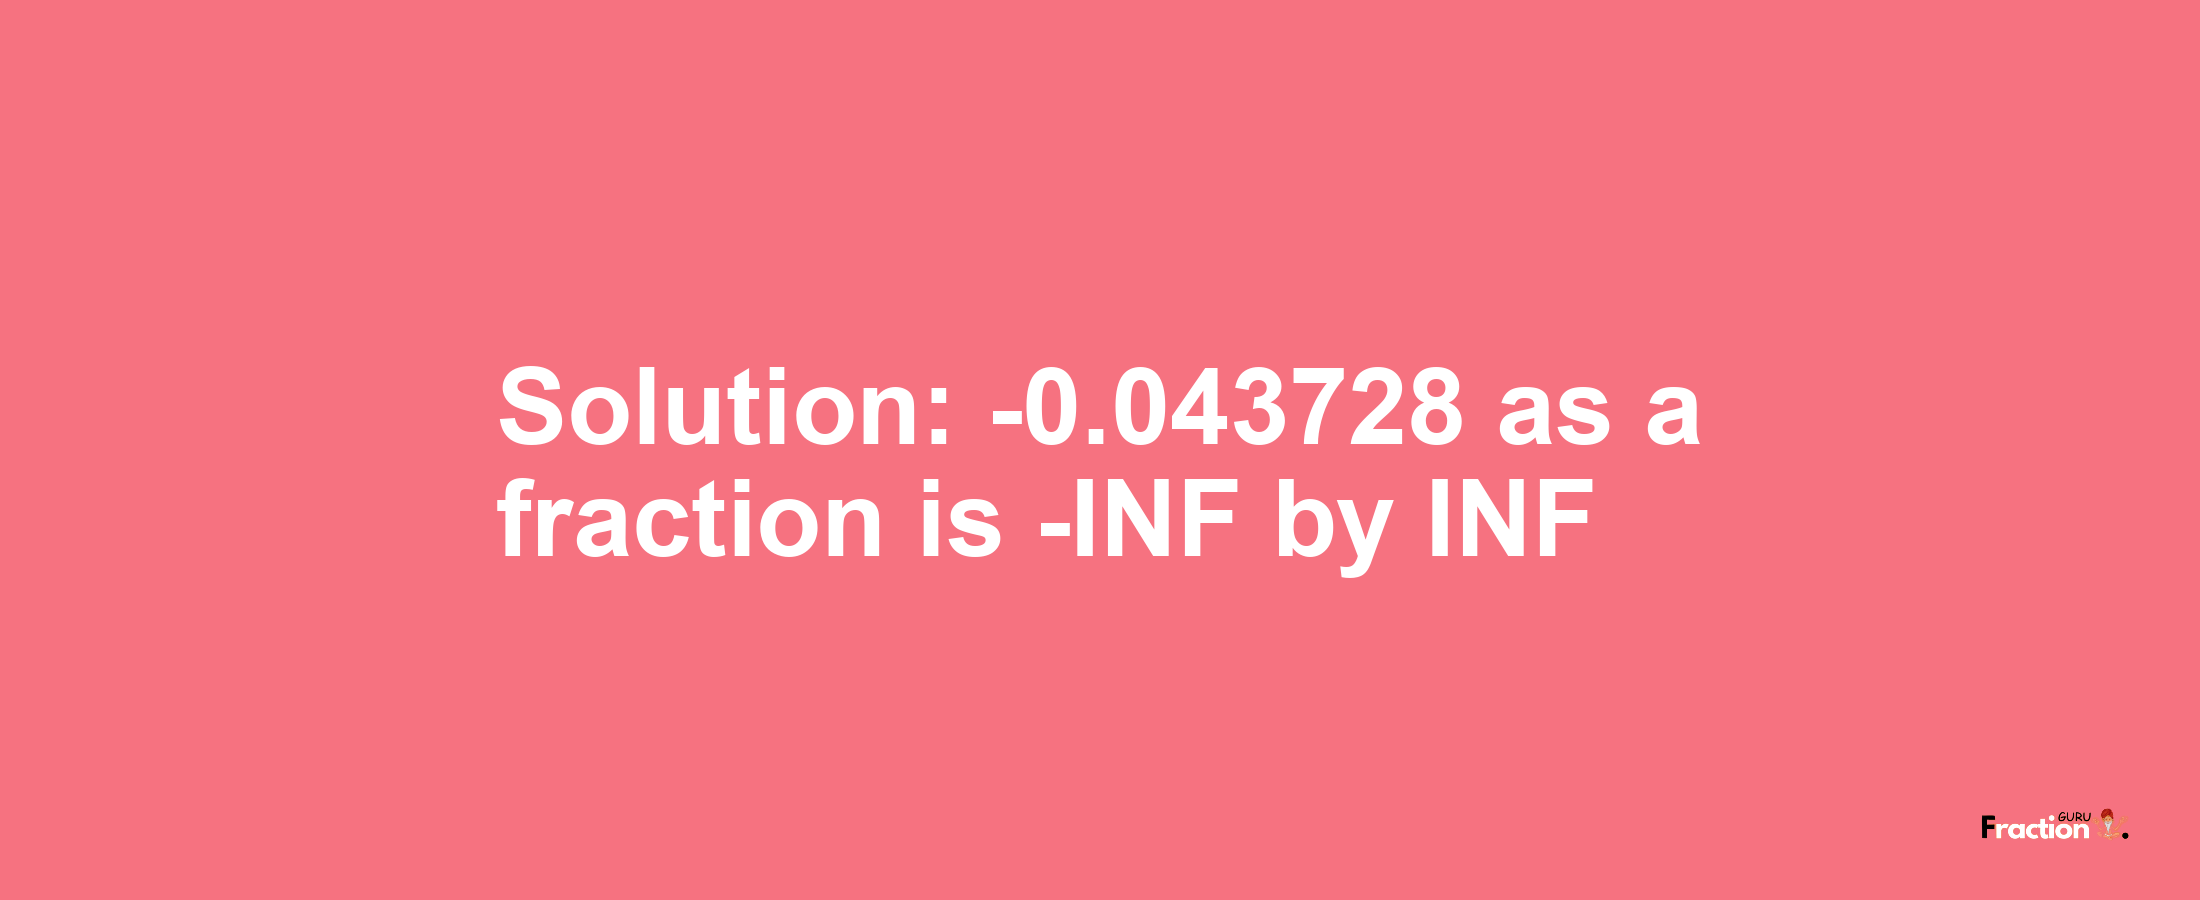 Solution:-0.043728 as a fraction is -INF/INF